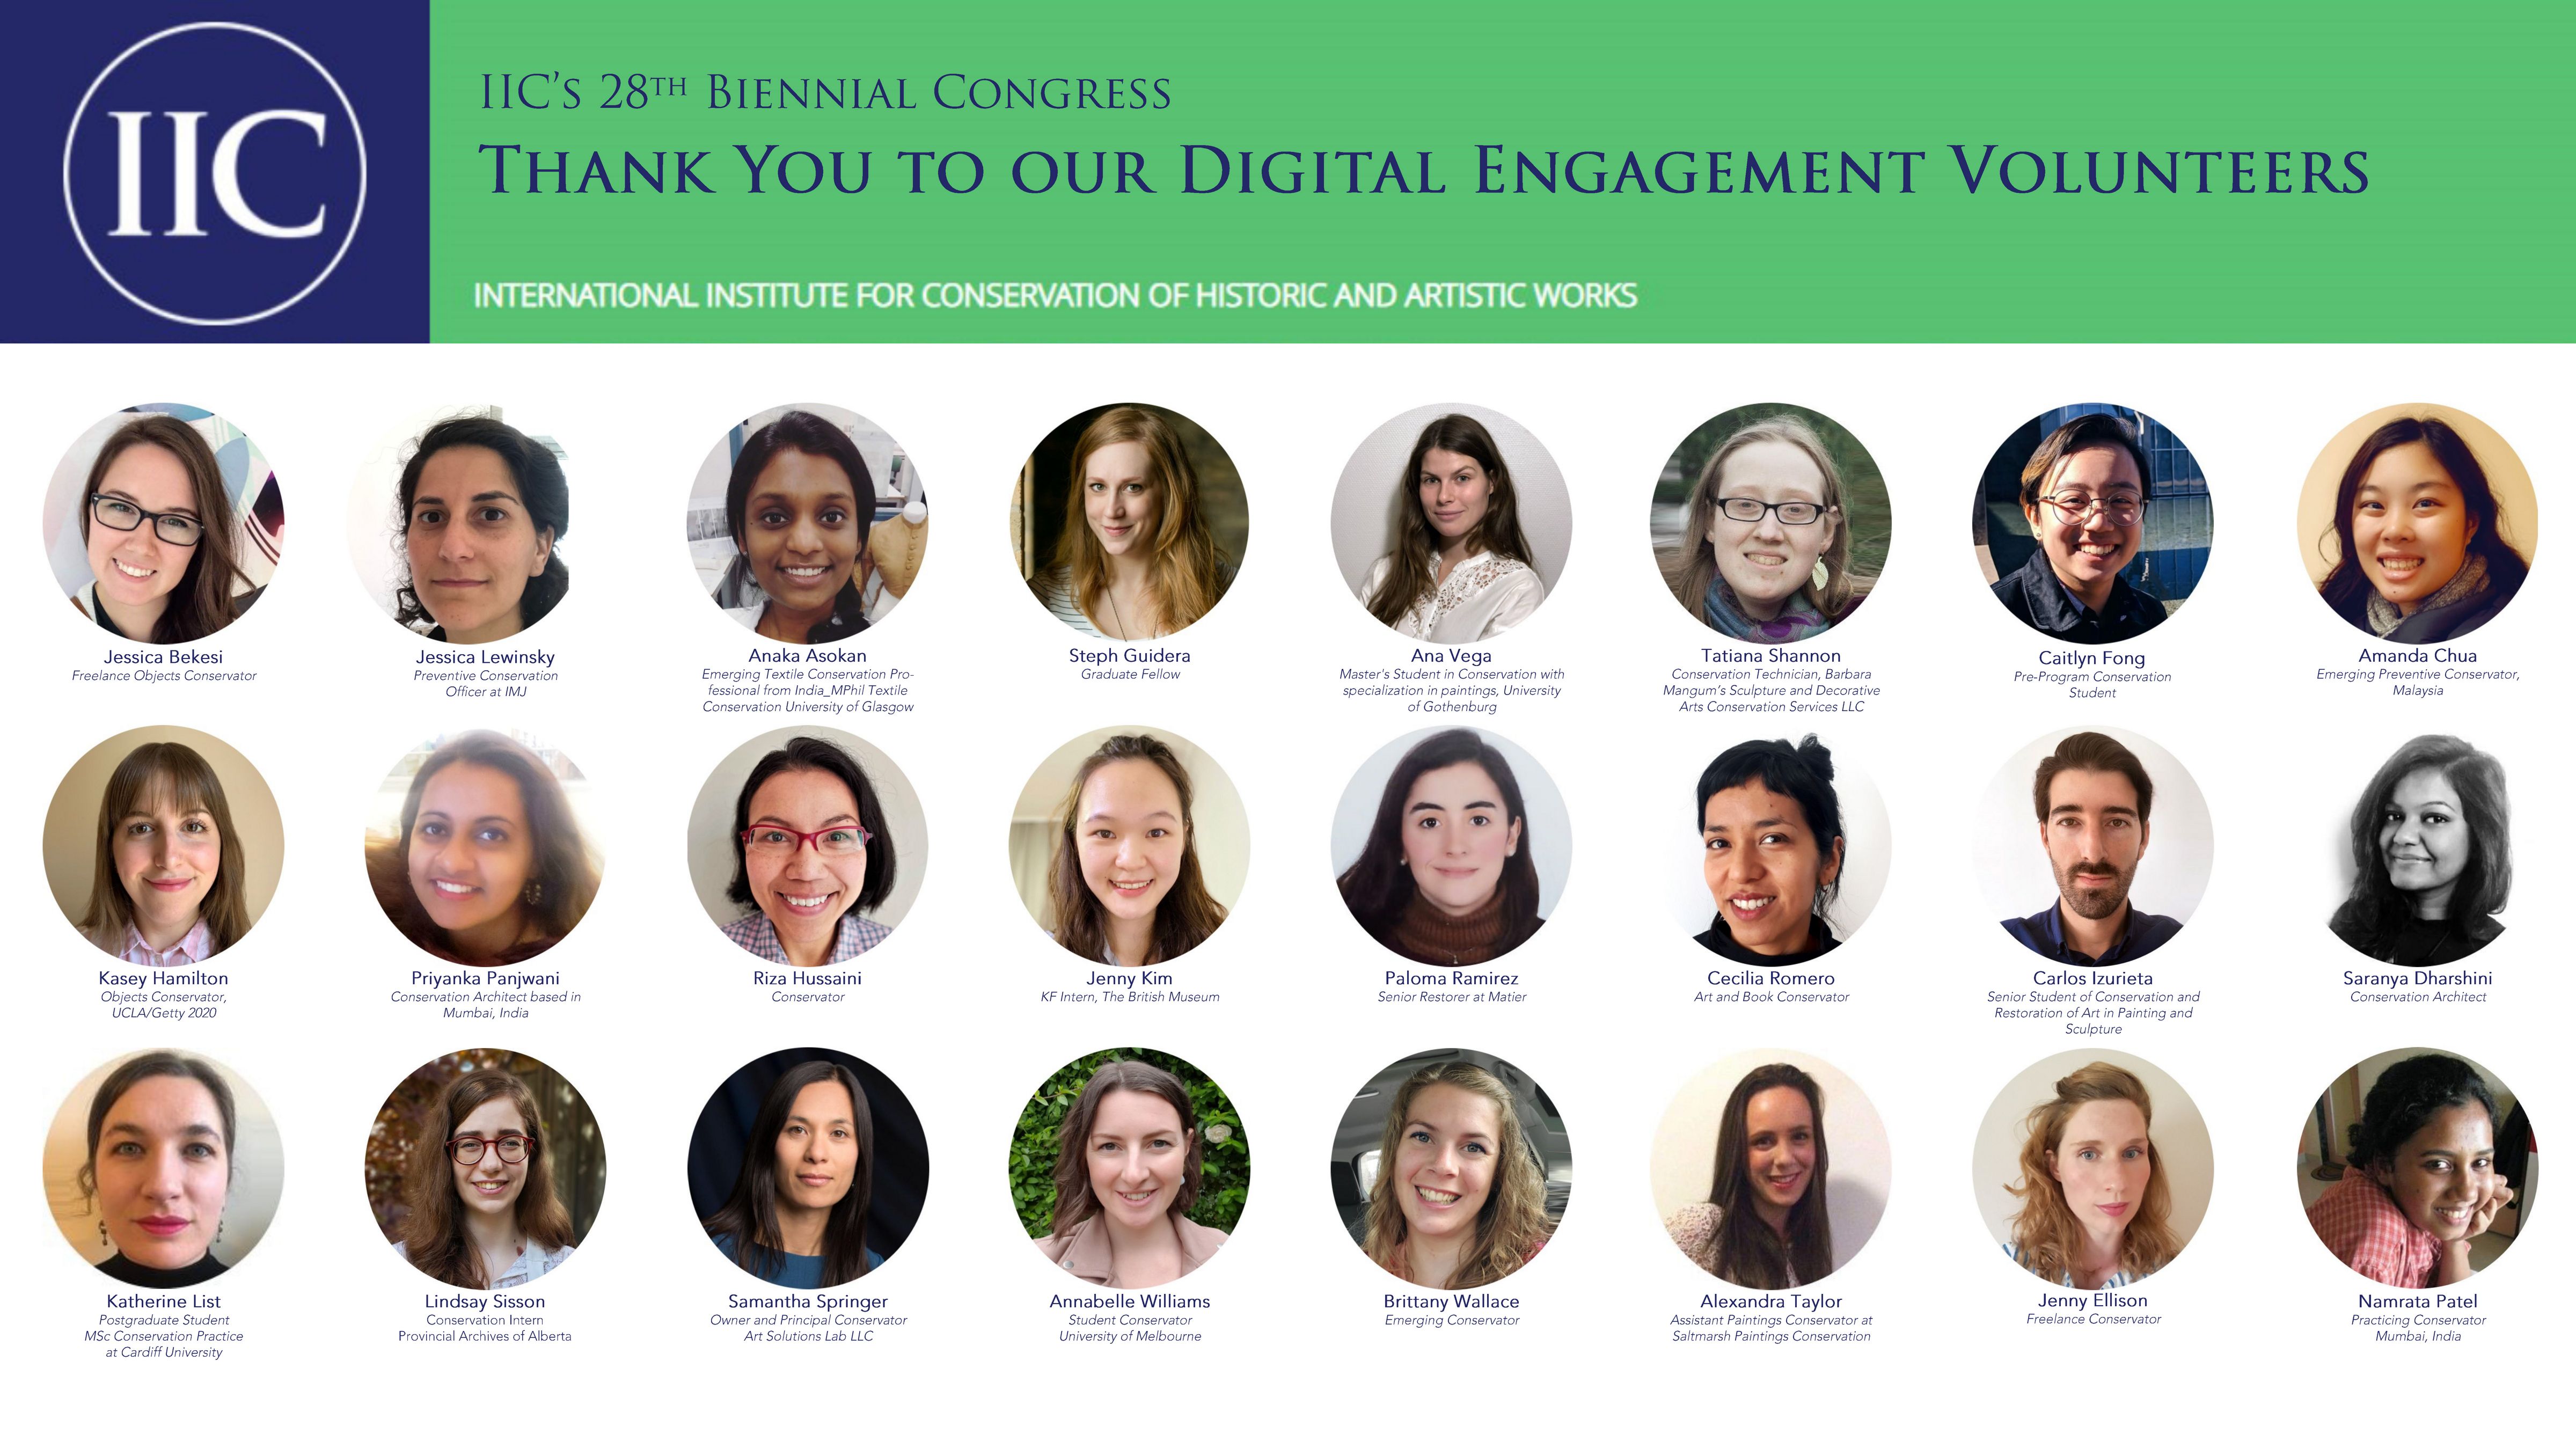 Thank You to the 2020 IIC Congress Digital Engagement Volunteers